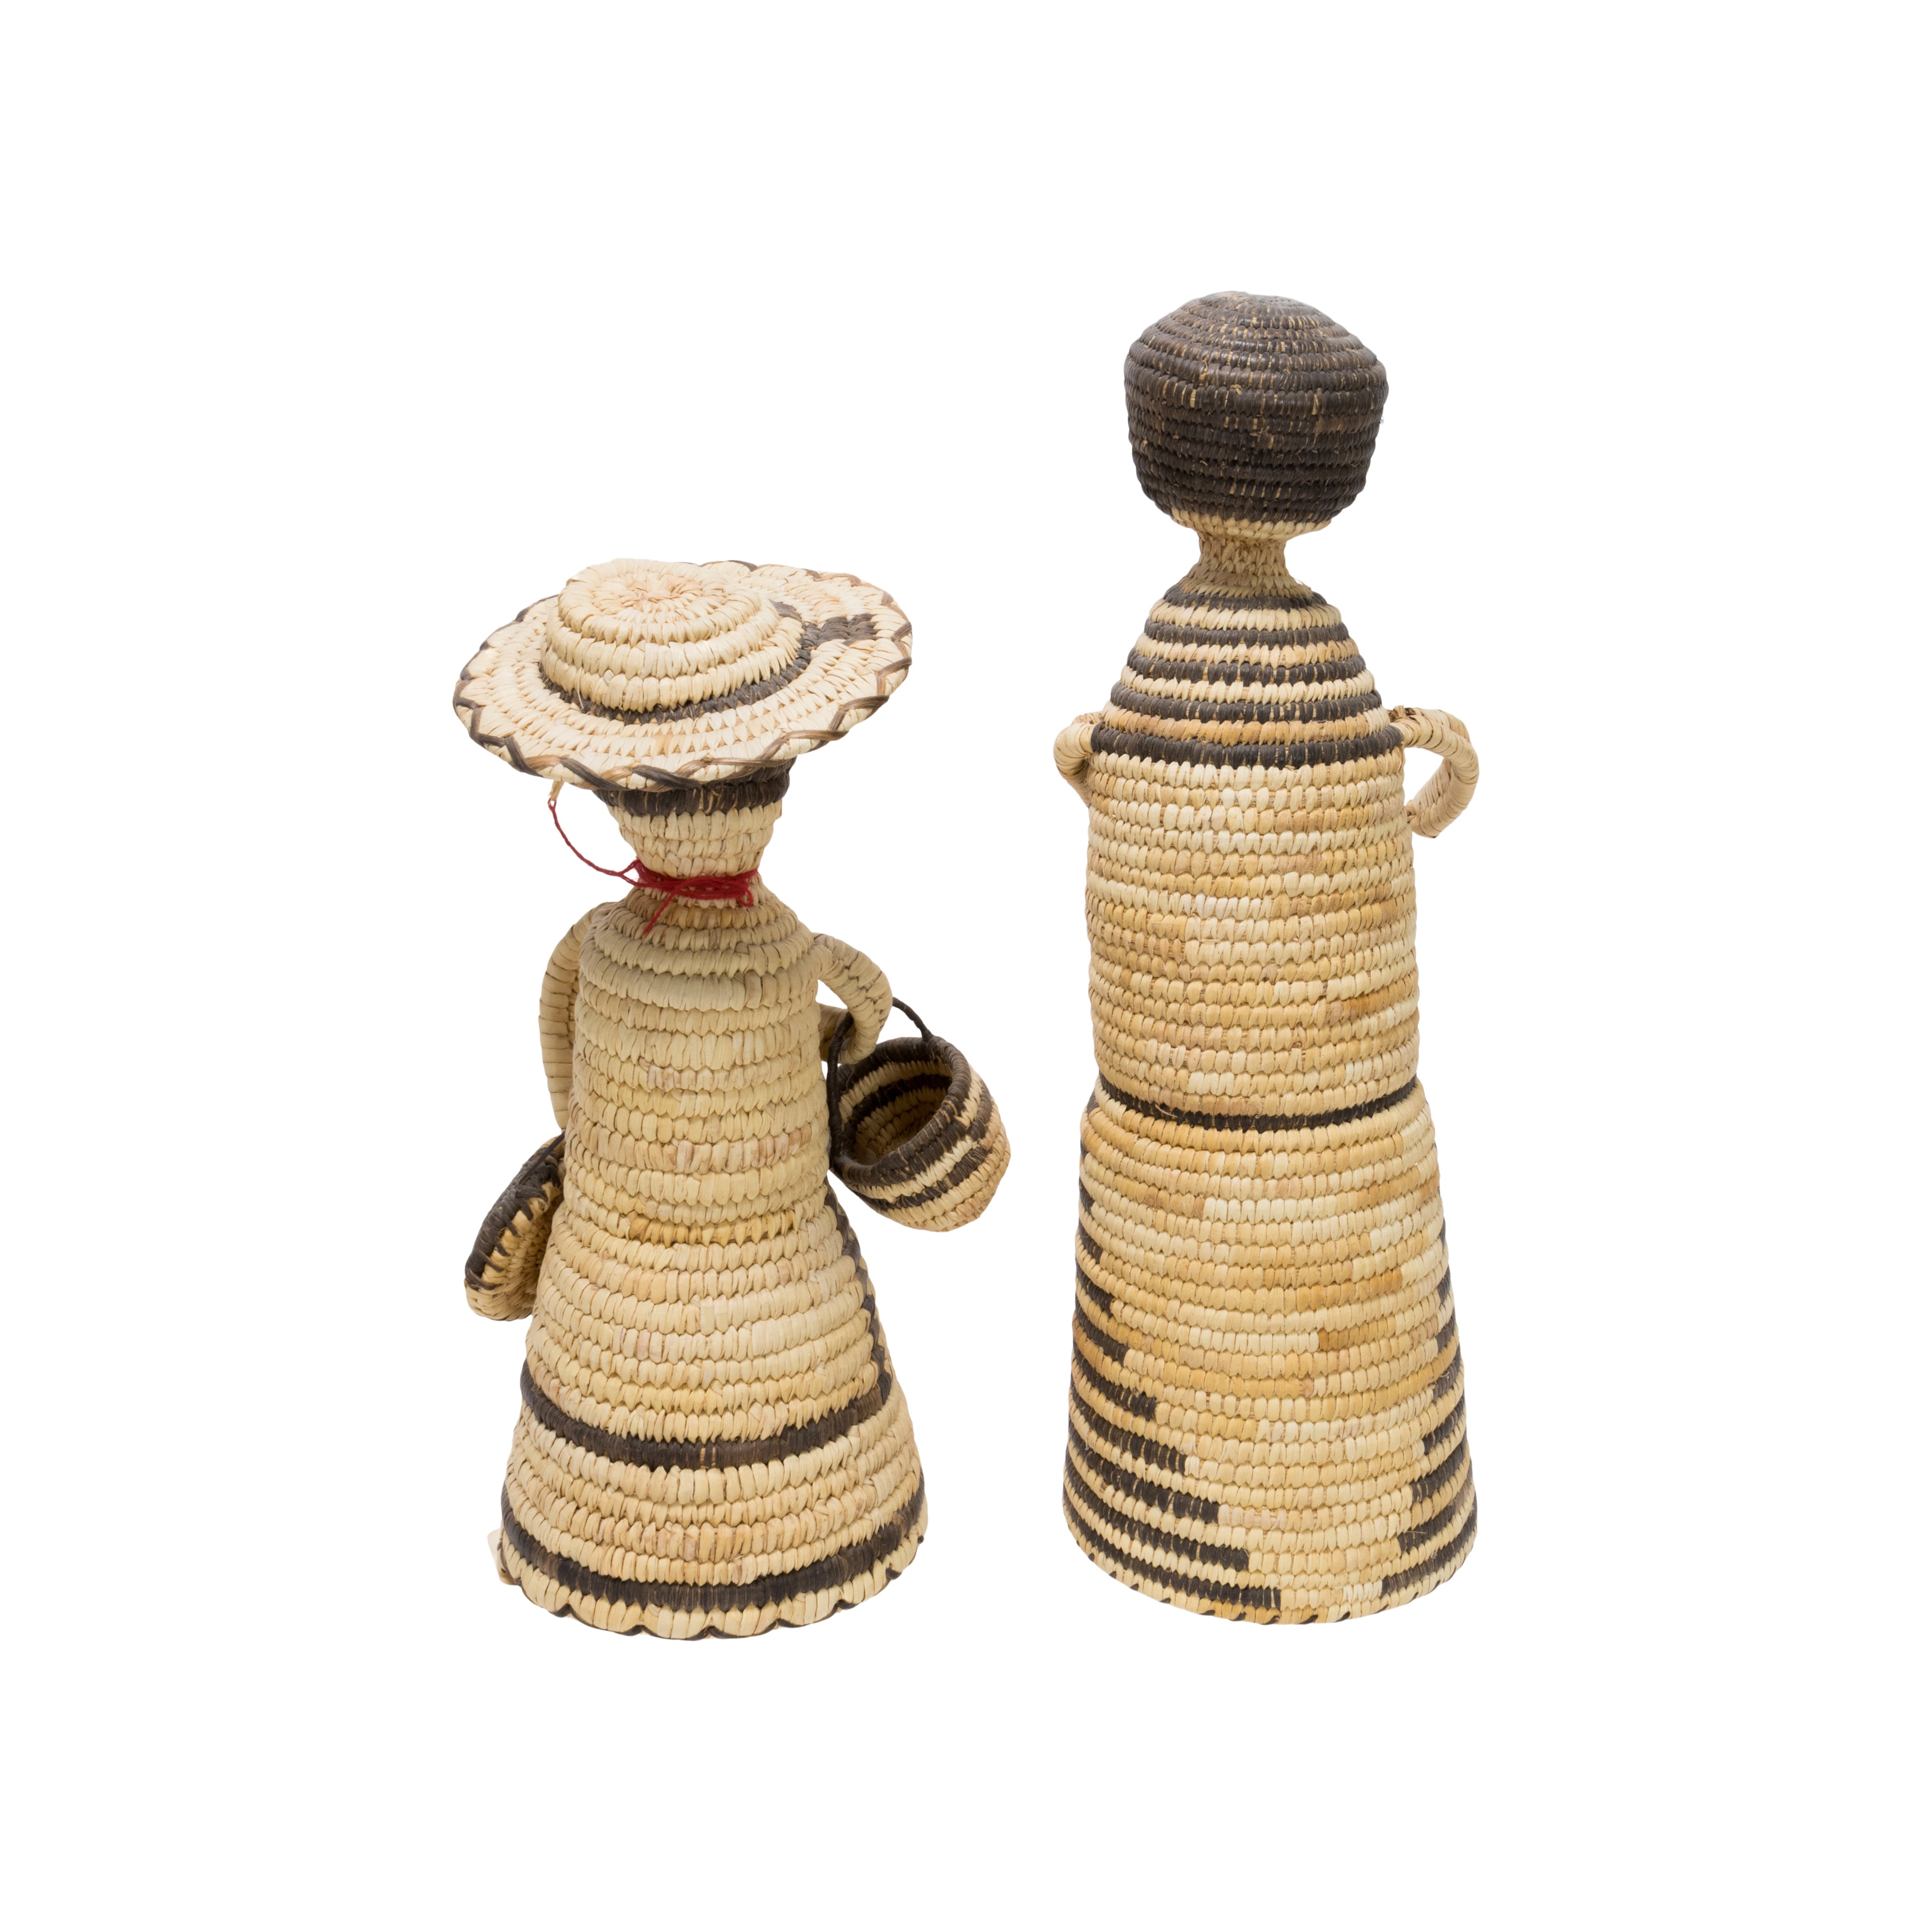 Pair of Papago Basketry Dolls